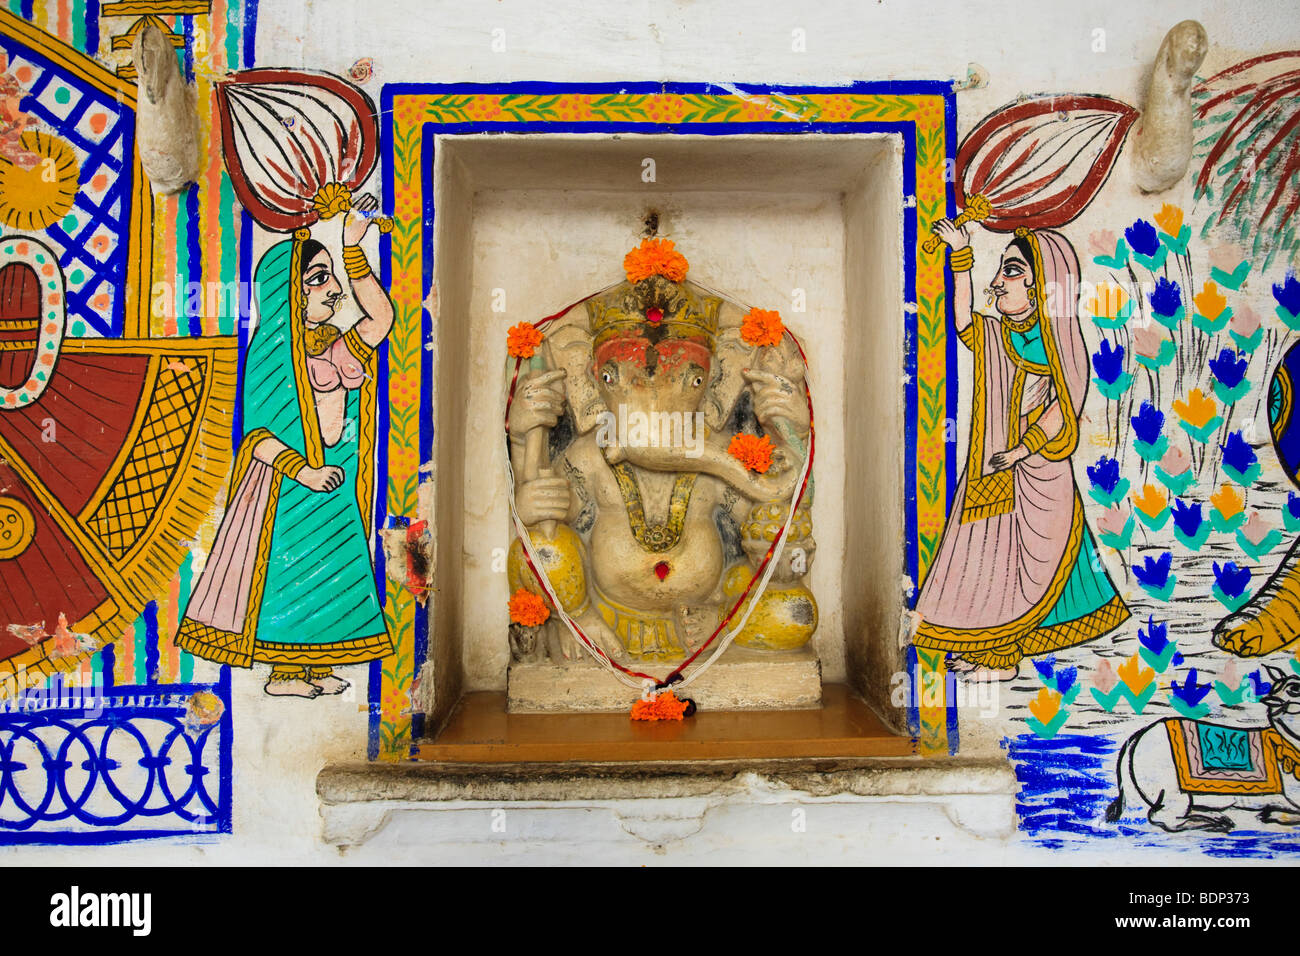 A decorated Ganesh shrine in the City Palace, Udaipur, India Stock Photo